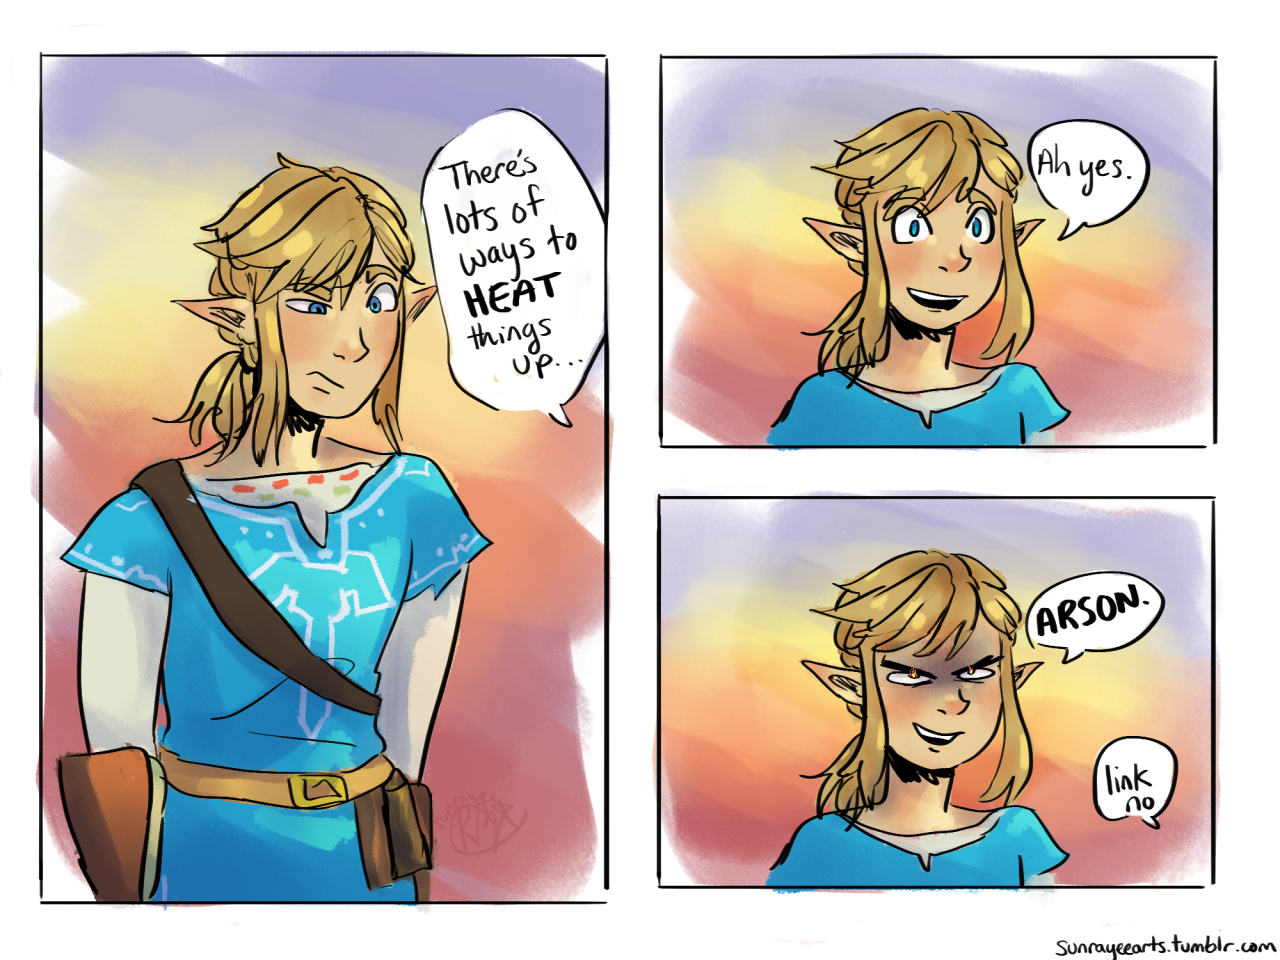 breath of the wild link memes - There's Ah yes. lots of ways to Heat things up.. Arson. link Sunrayeearts.tumblr.com